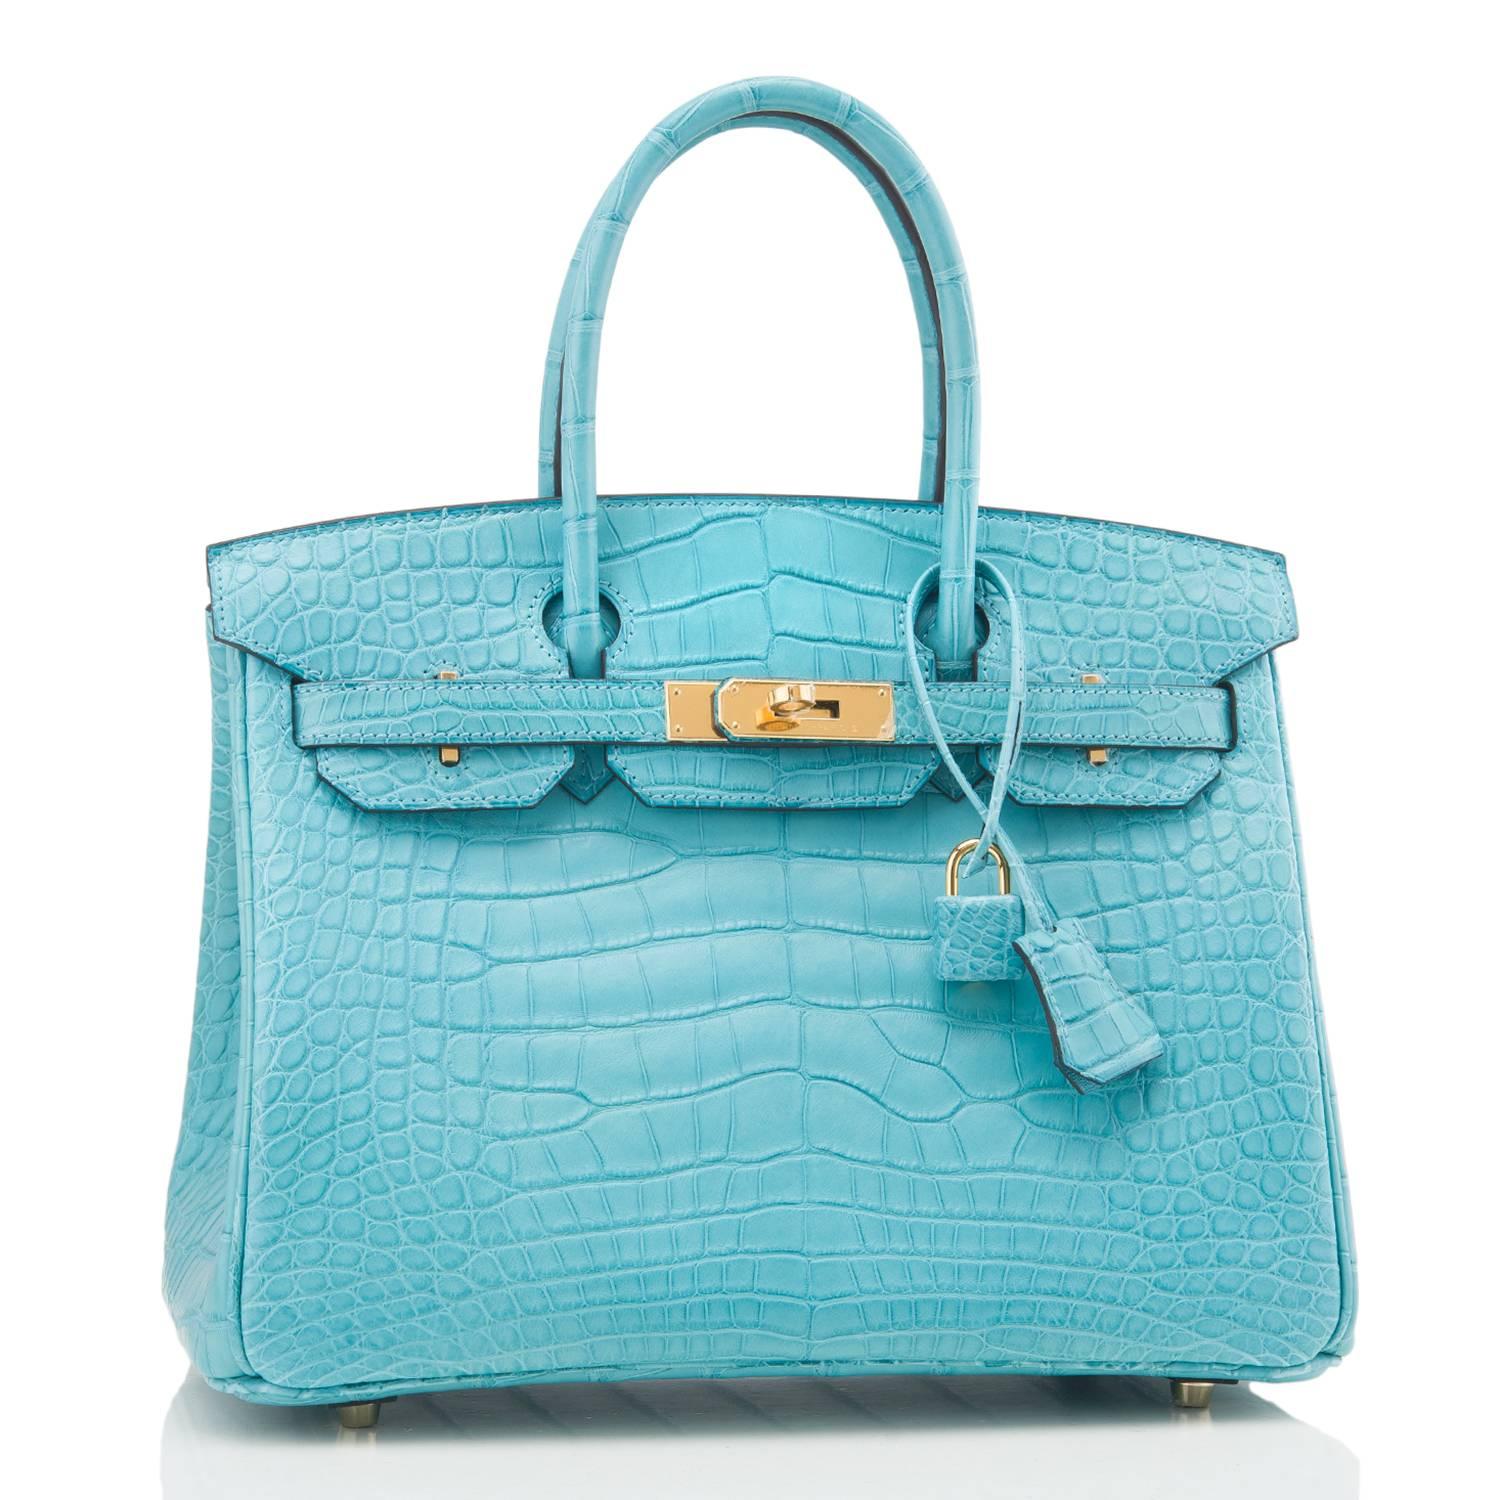 Hermes Blue Saint Cyr Birkin 30cm of matte alligator with gold hardware.

This Birkin has tonal stitching, a front toggle closure, a clochette with lock and two keys, and double rolled handles.

The interior is lined with Blue Saint Cyr chevre and